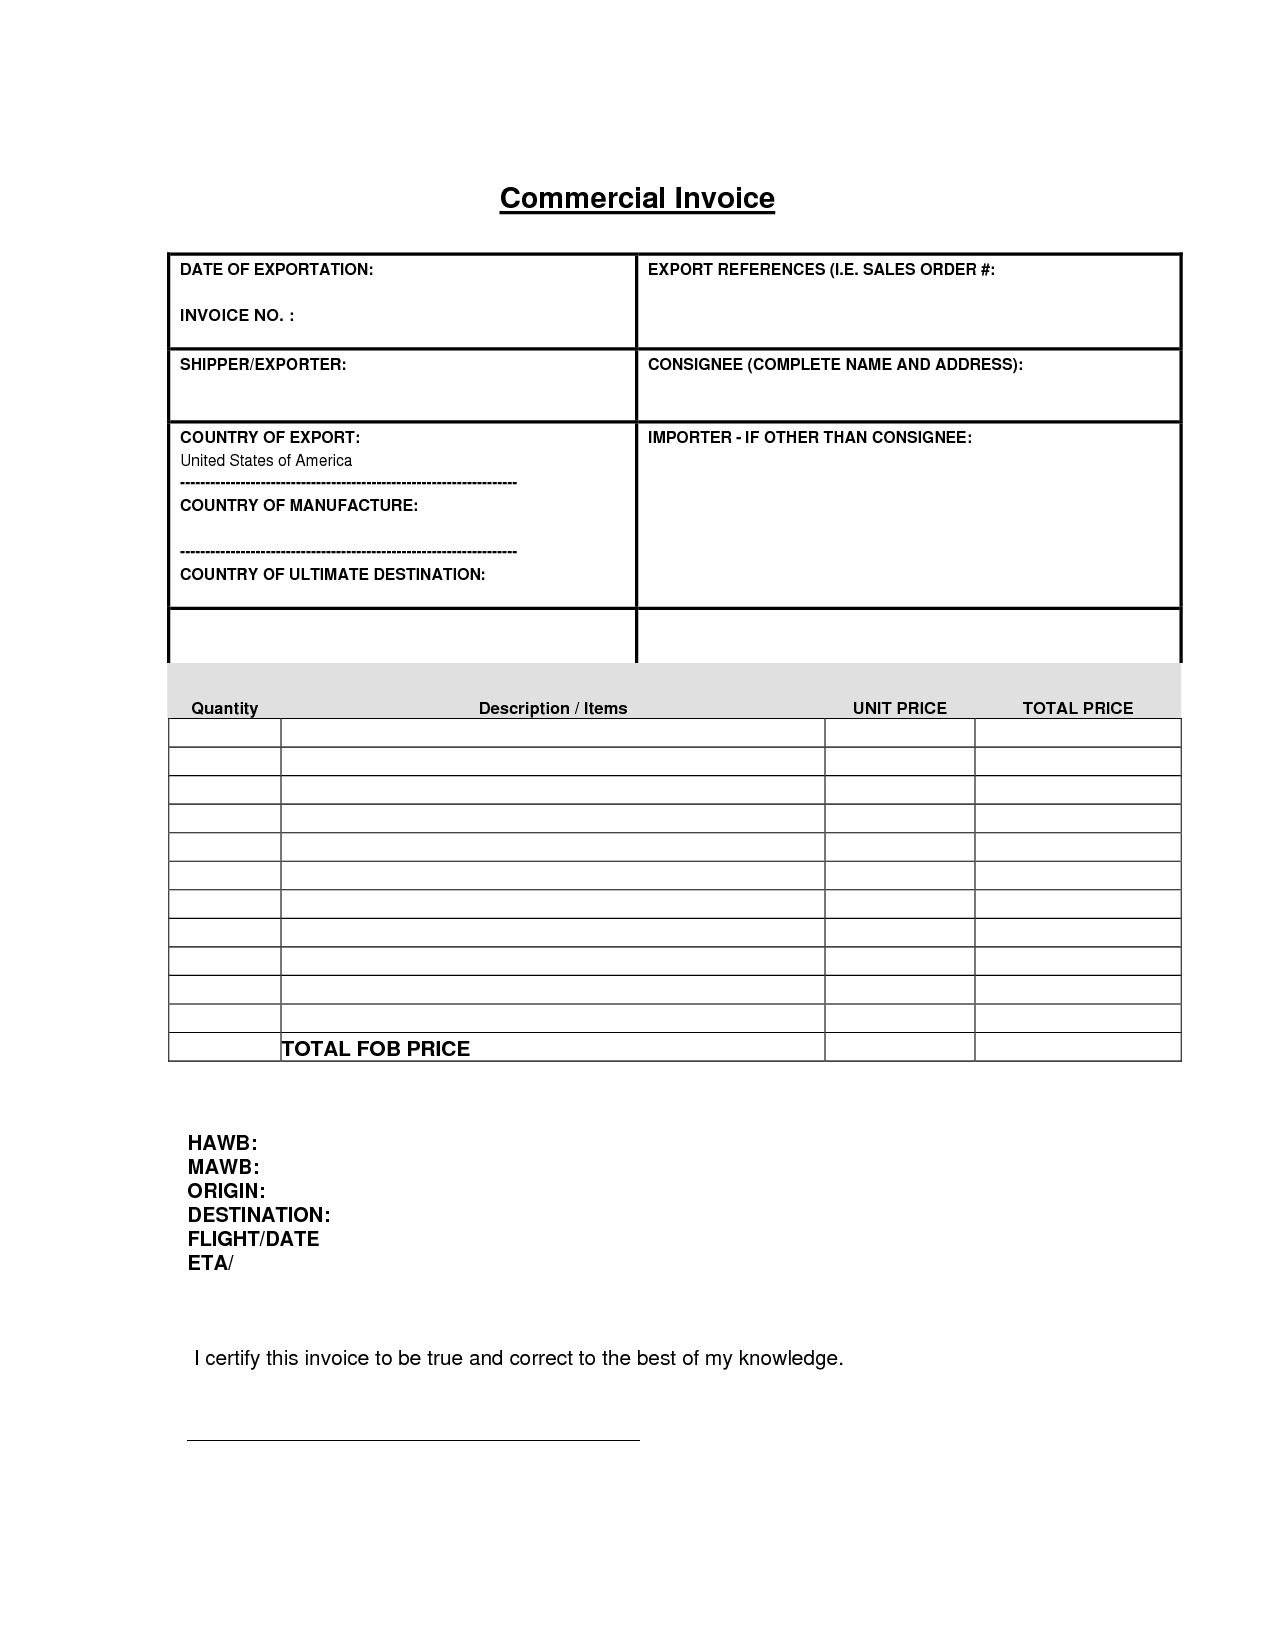 commercial invoice sample excel invoice template ideas commercial invoice excel